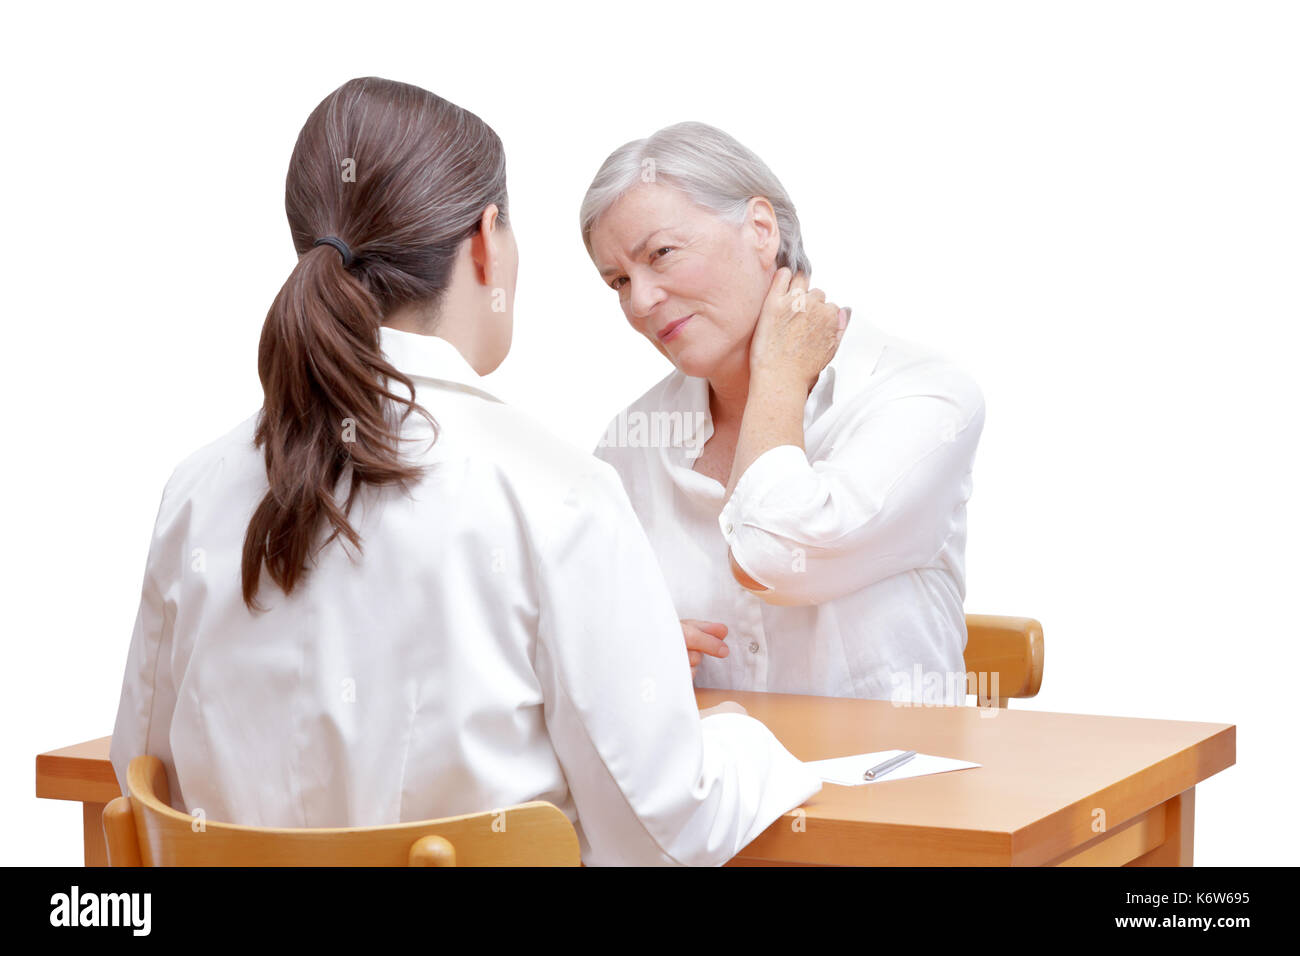 Senior female patient consulting her physician or doctor on account of acute neck pain caused by muscular tension, isolated on white background Stock Photo